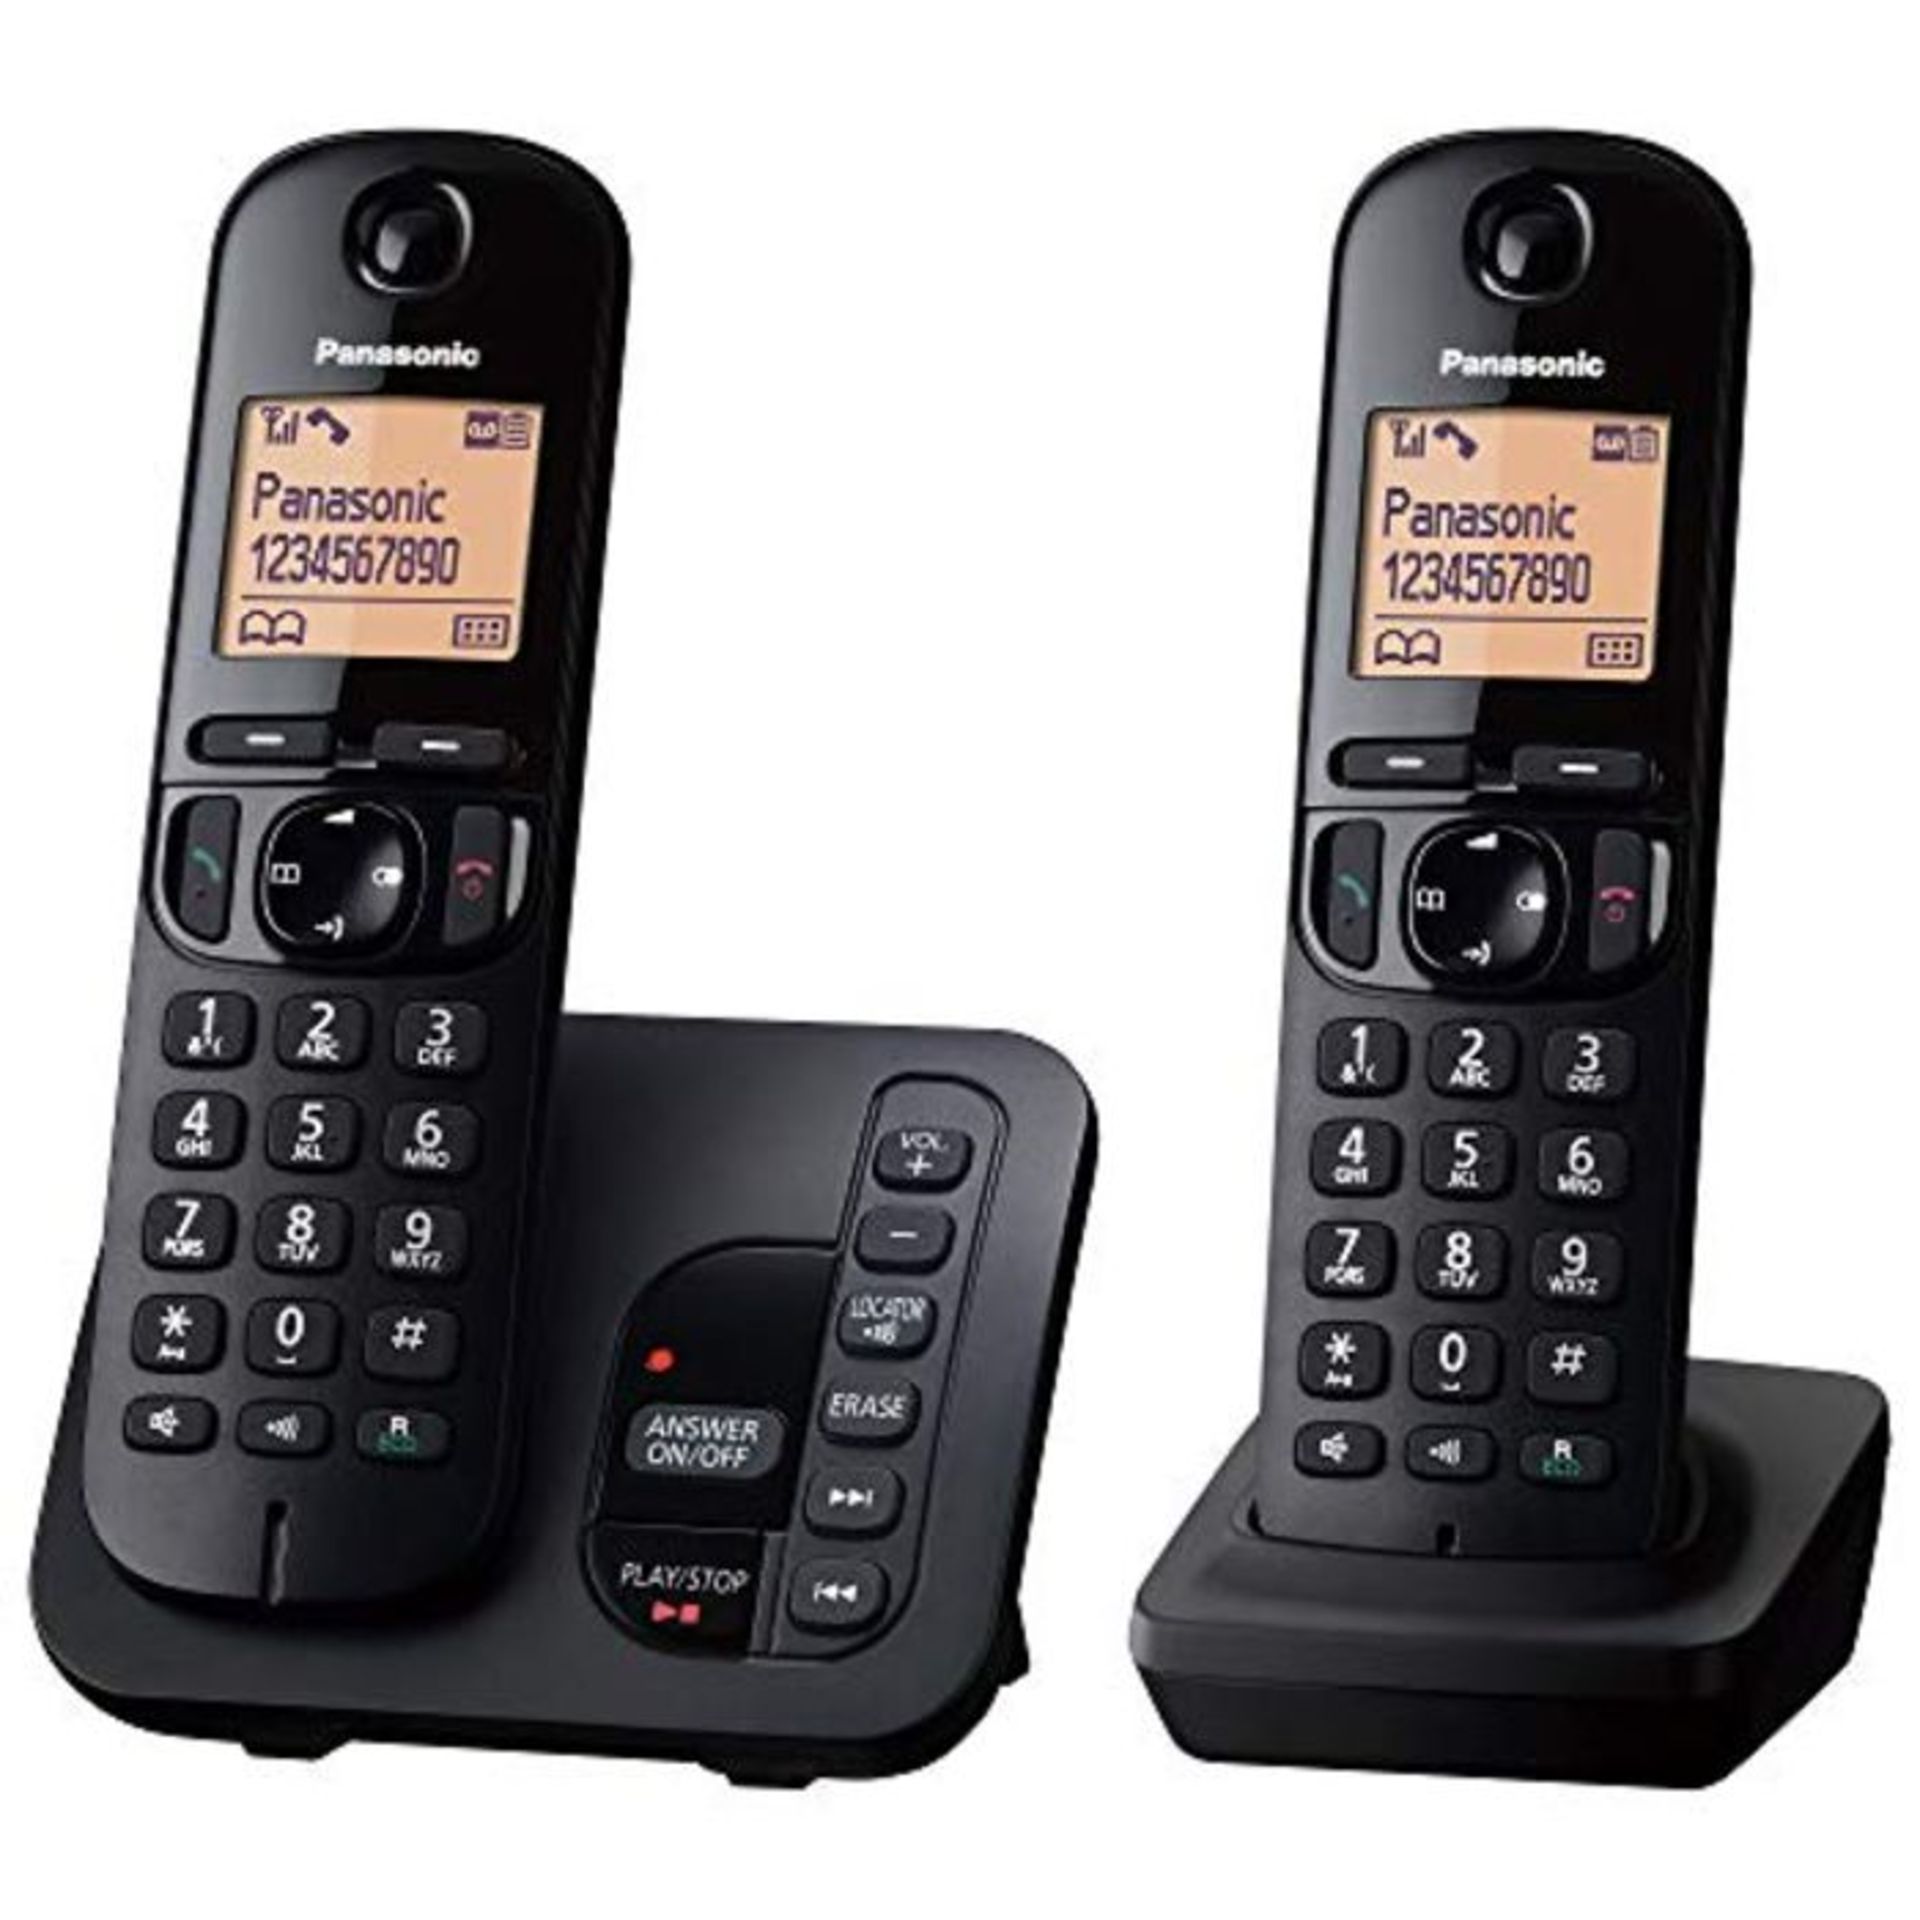 Panasonic KX-TGC222EB DECT Cordless Phone with Answering Machine, 1.6 inch Easy-to-Rea